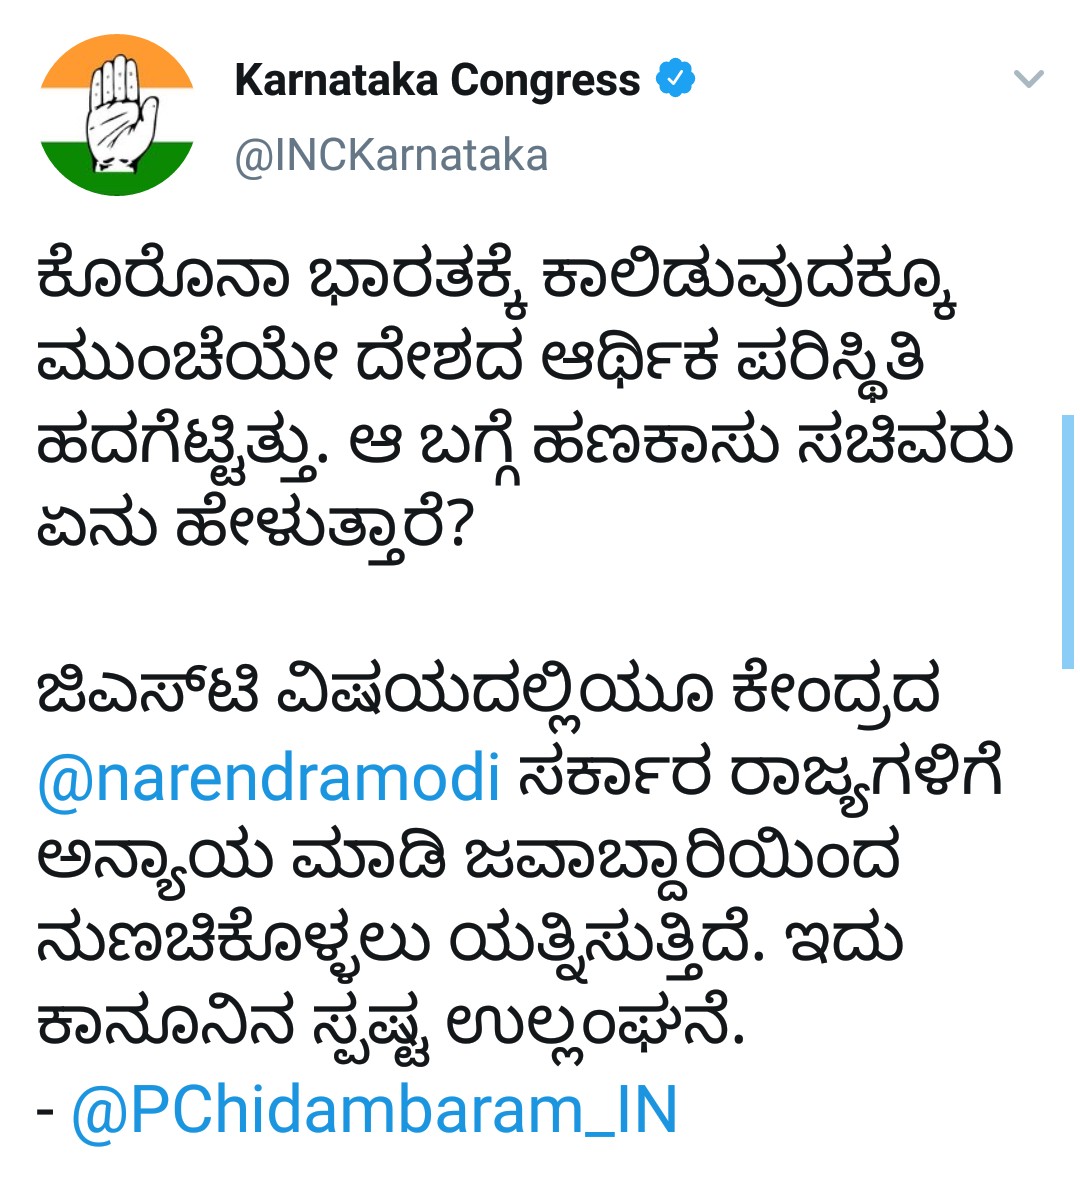 State Congress Party outrage against the central BJP government